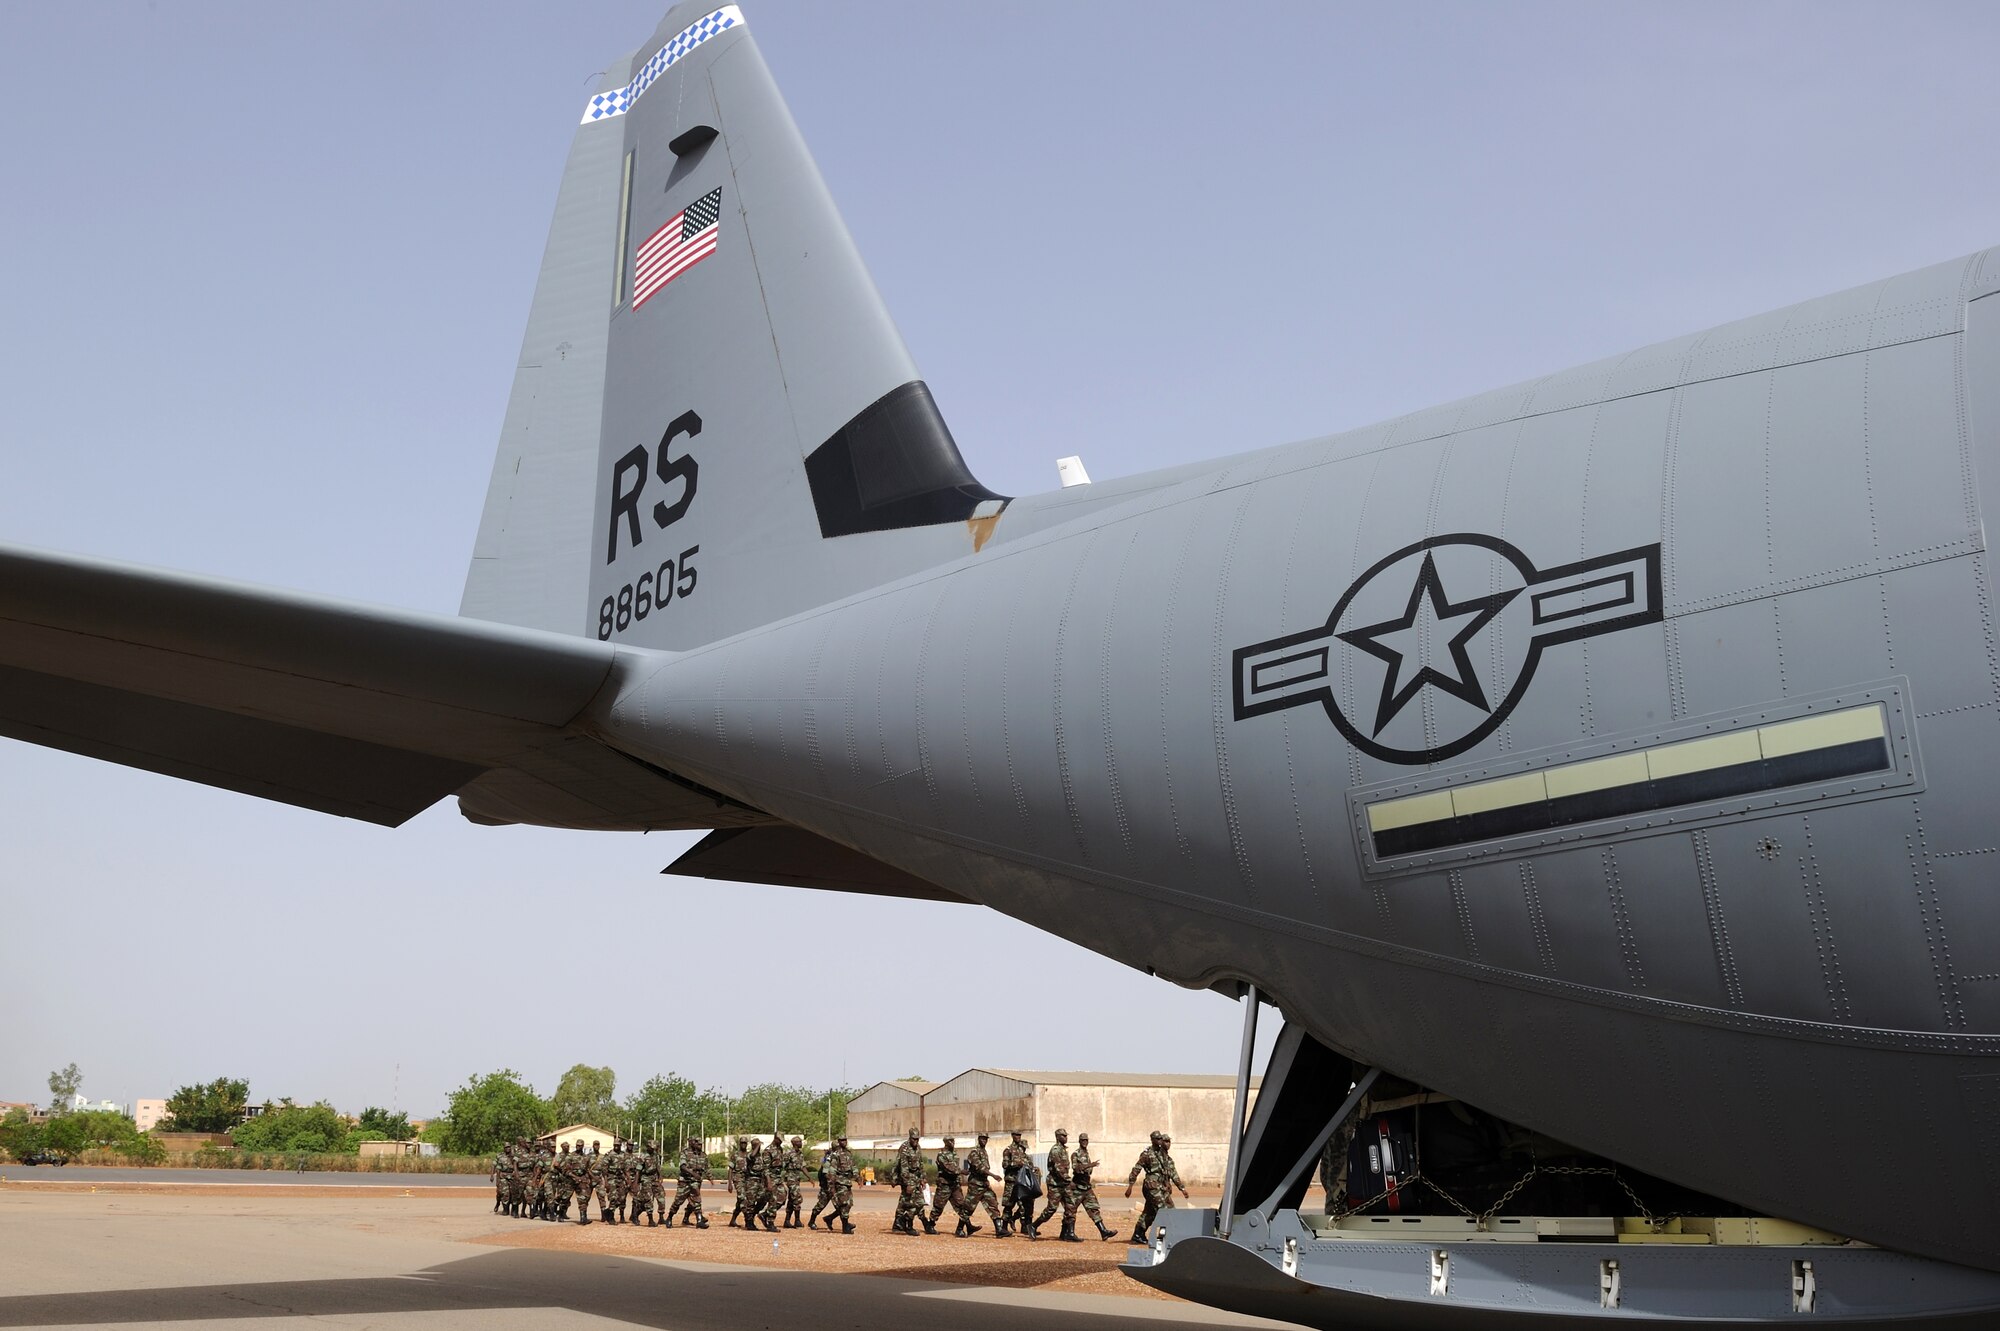 OUAGADOUGOU, Burkina Faso -- Burkinabe Army soldiers march toward a Ramstein Air Base C-130J Super Hercules May 1, to begin their deployment to Mali in support of Exercise Flintlock 10.  An element of about 40 soldiers boarded the C-130J to deploy for counter-terrorism training with U.S., Malian and European partners.  Flintlock 10 is an exercise focused on military interoperability and capacity-building and is part of a U.S. Africa Command sponsored annual exercise program with partner nations in Northern and Western Africa.  Approximately 1,200 African, European and U.S. participants from 14 nations are involved in military interoperability activities across the Trans-Saharan region during this event.  (U.S. Air Force photo by Master Sgt. Jeremiah Erickson) 